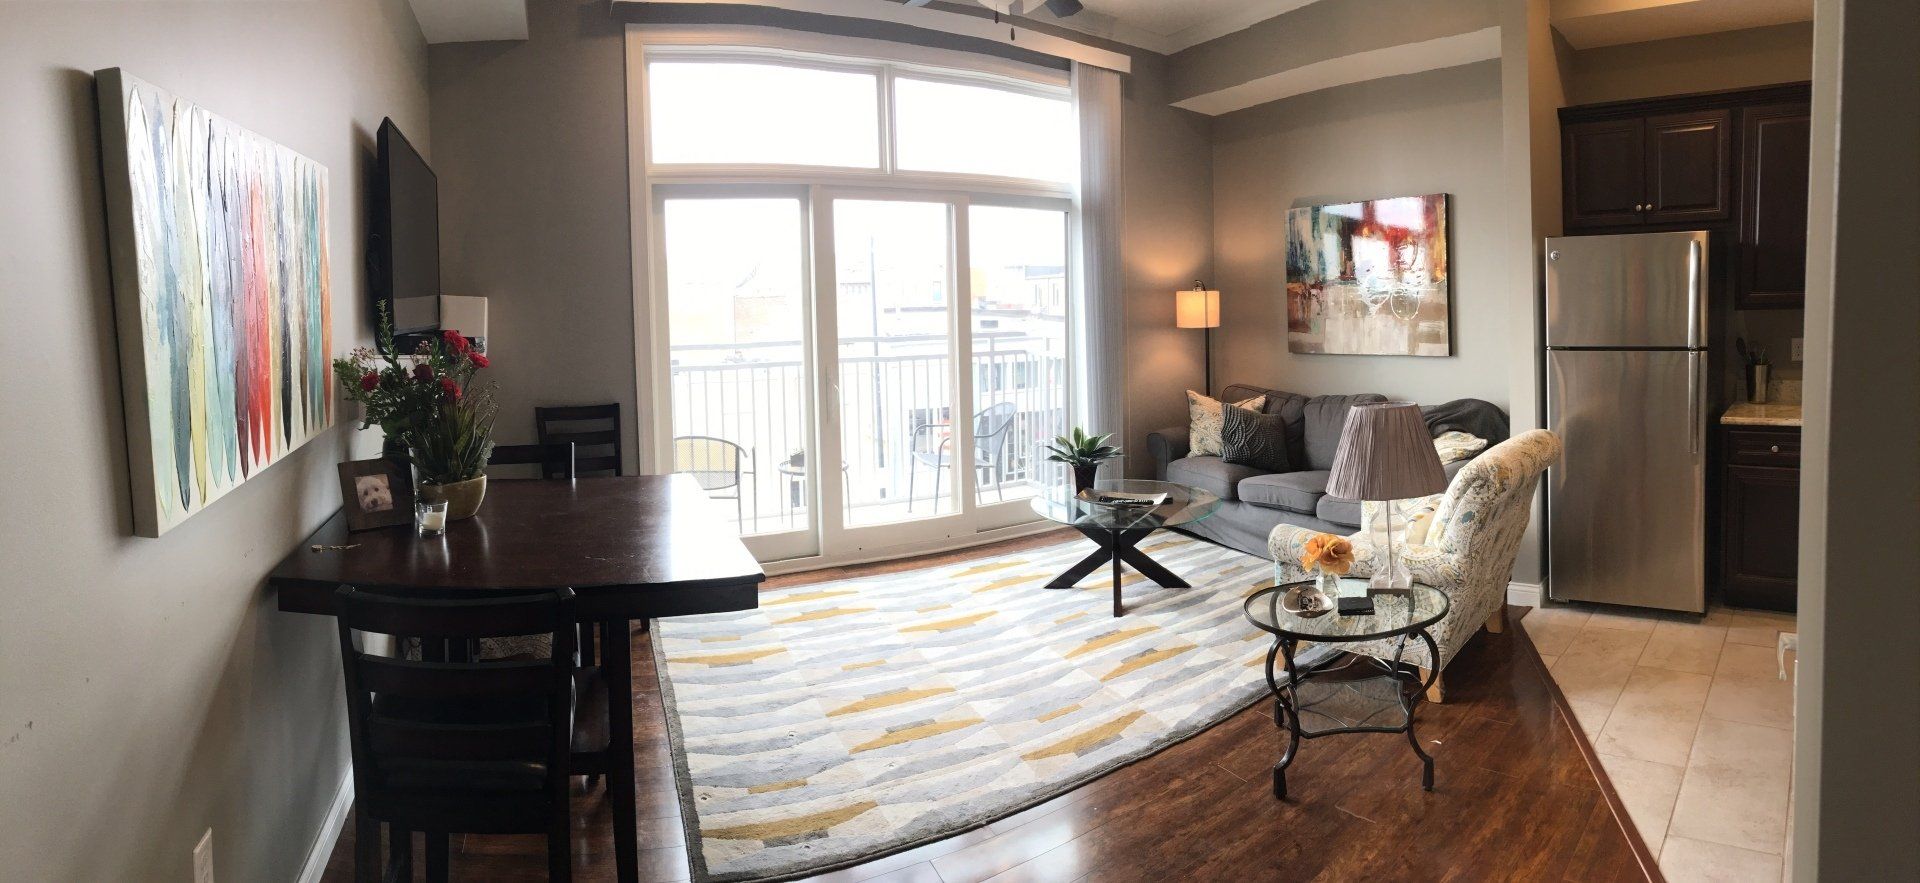 A Window View of The Lofts on Broadway's Stylish Living Rooms in Columbia, MO